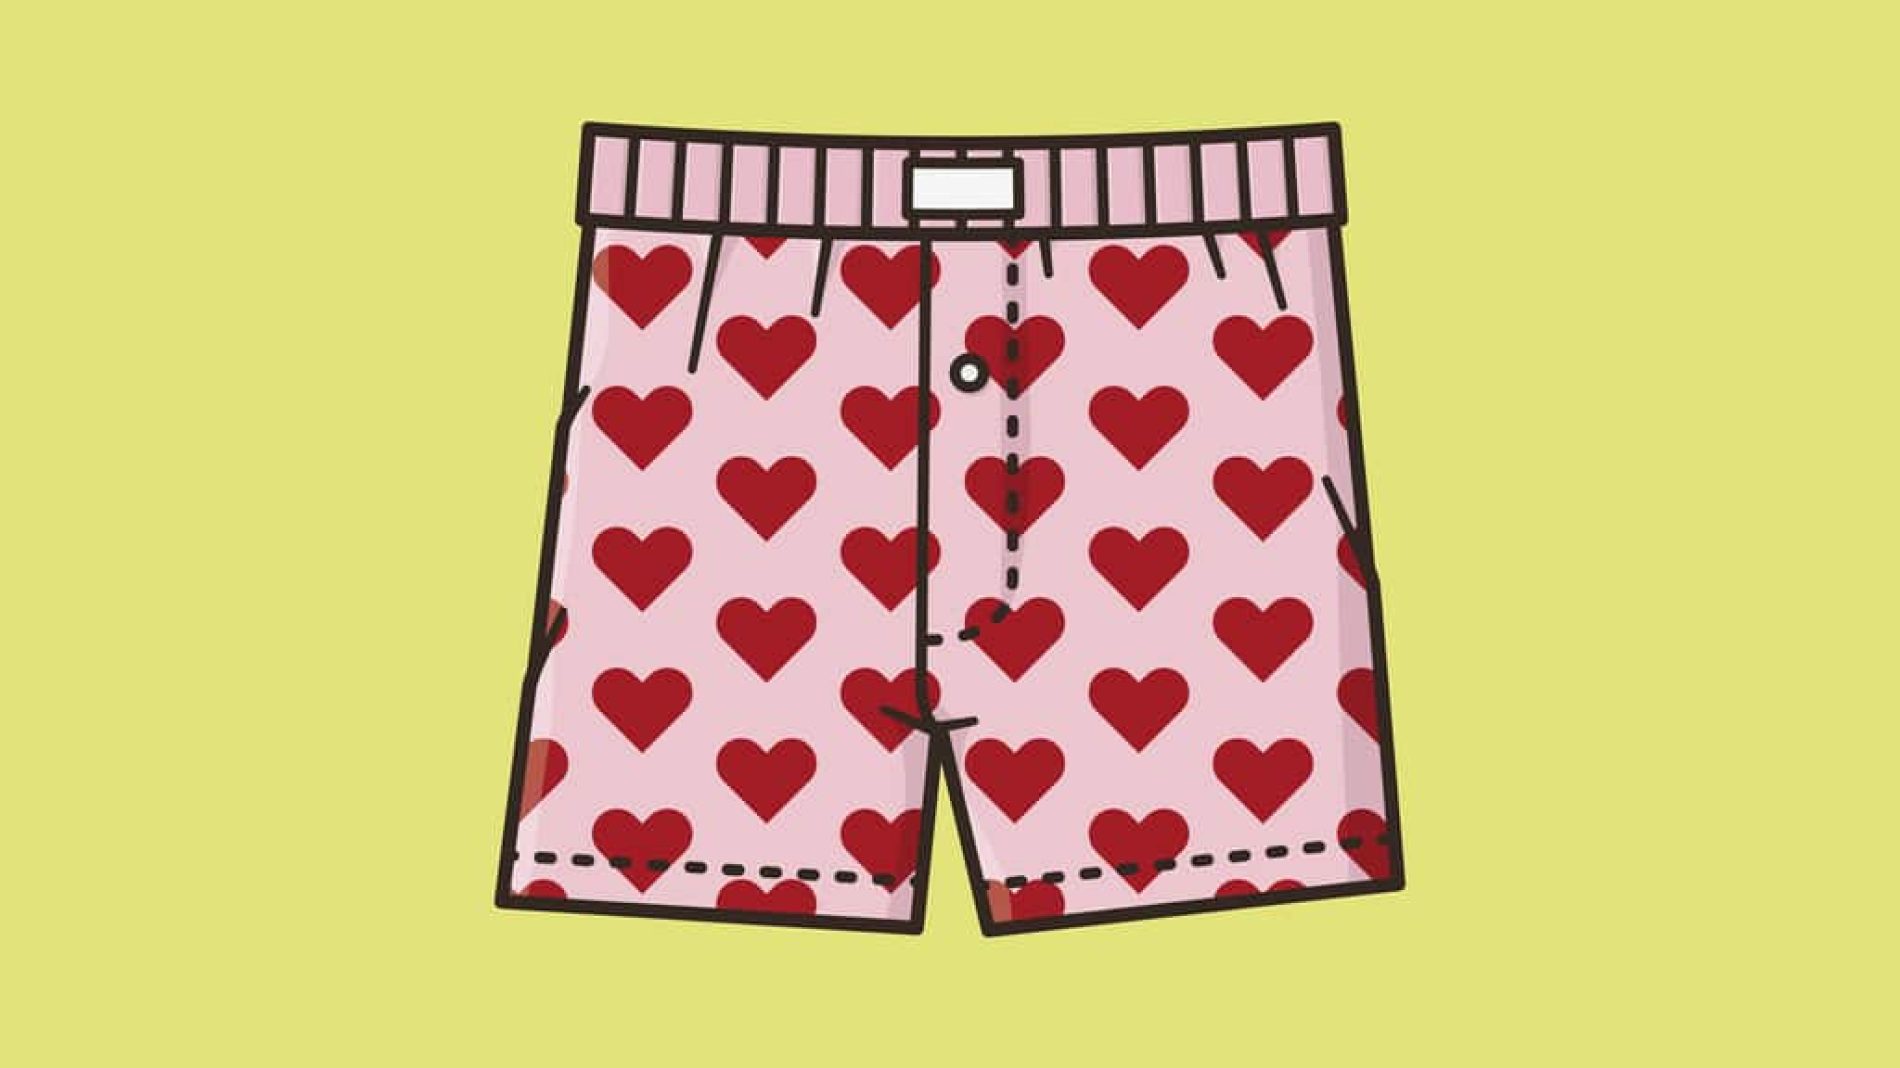 Mens underpants with hearts pattern vector illustration for Boxer Shorts Day on October27